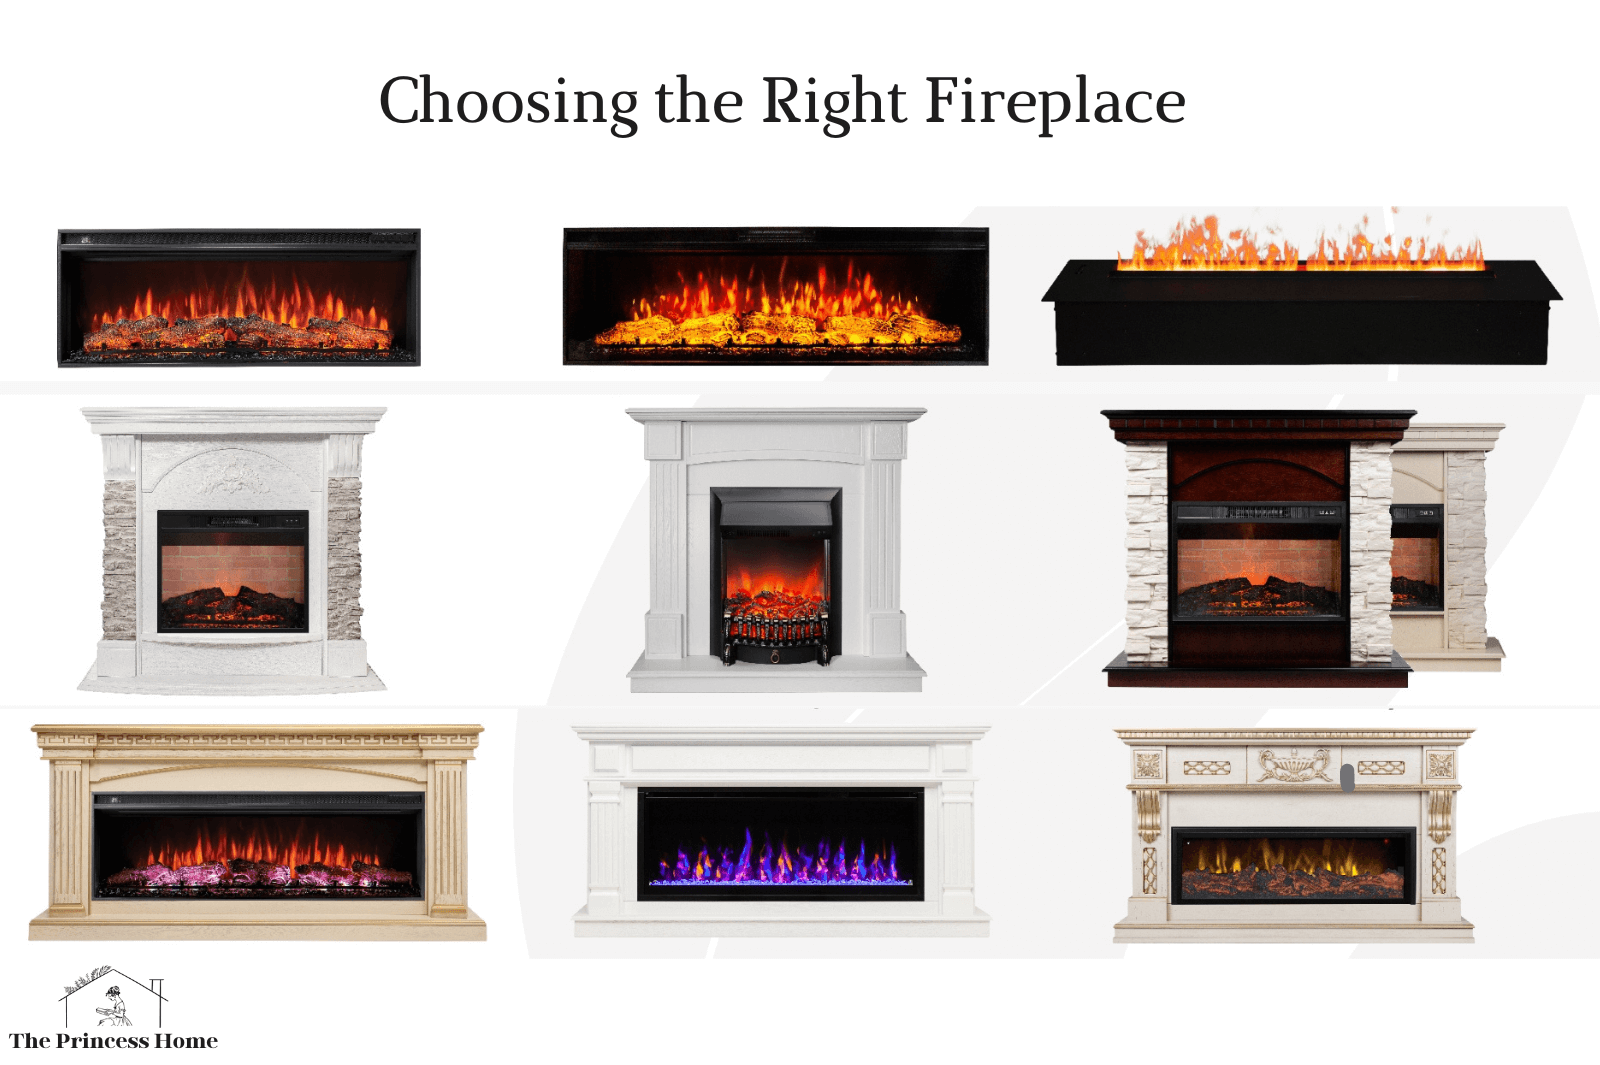 1.Choosing the Right Fireplace